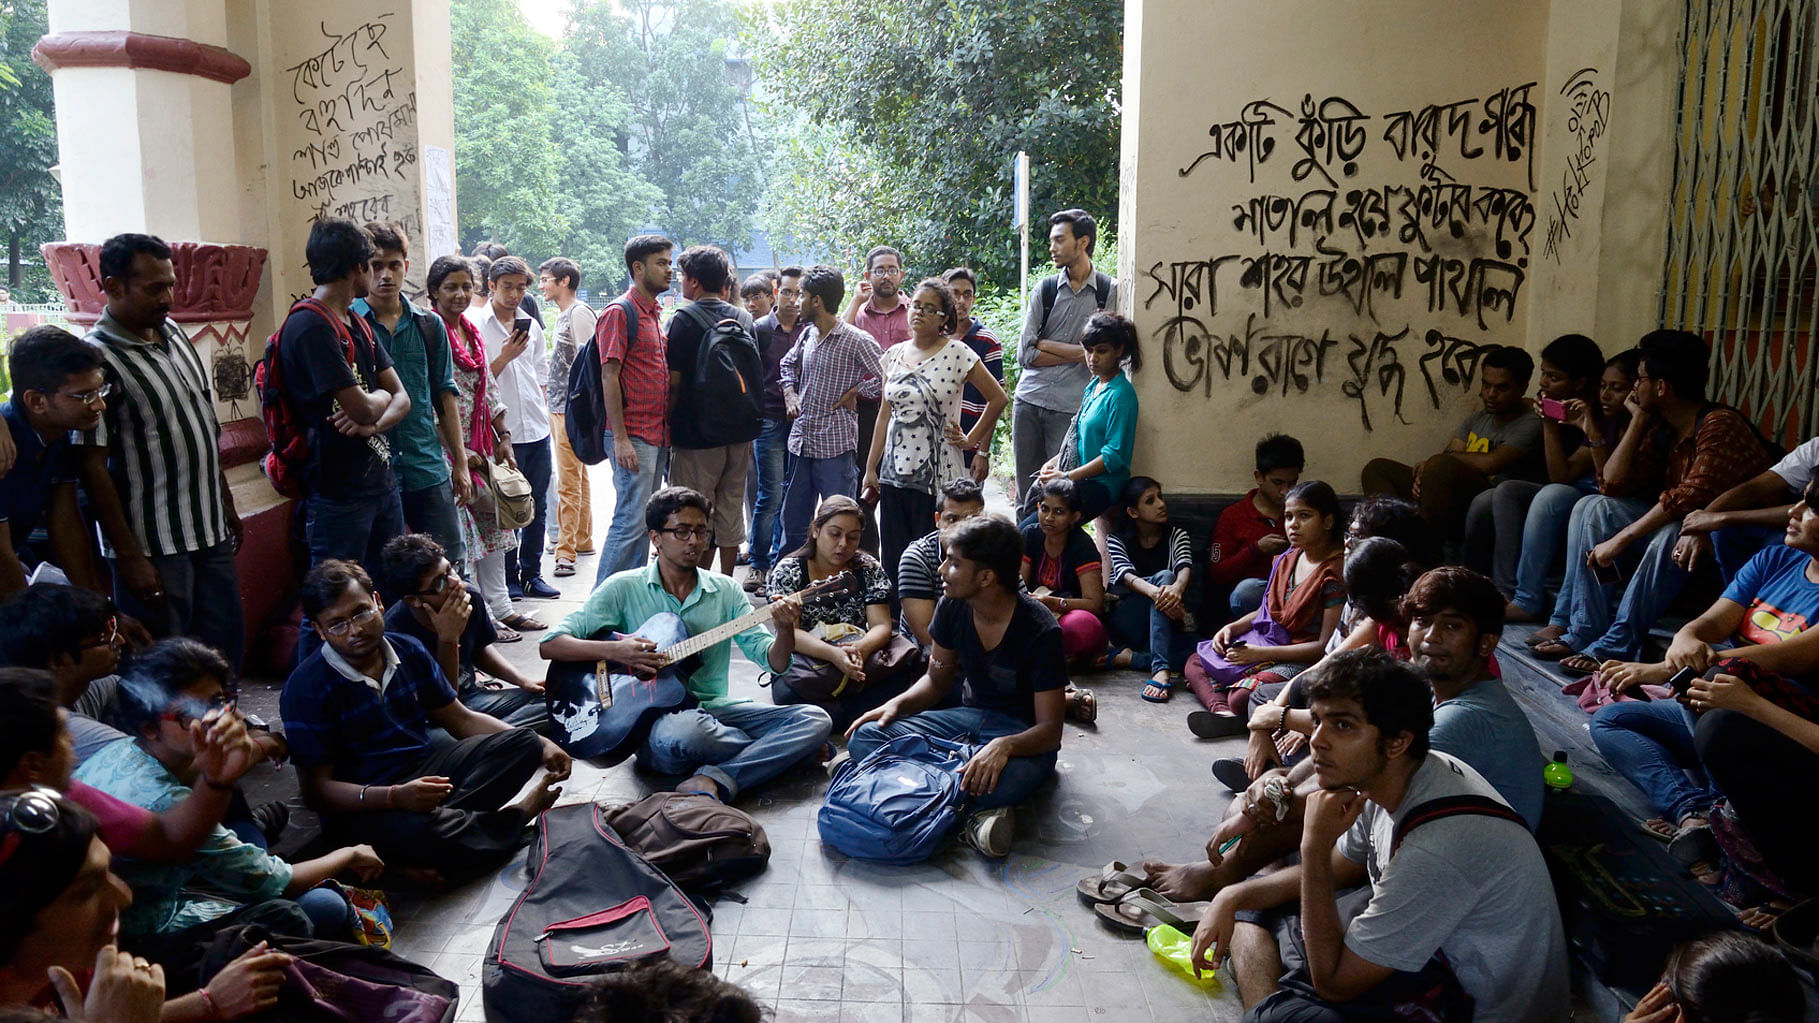 A protest in a college in Kolkata. Photo used for representational purpose. (Photo: iStockPhoto)